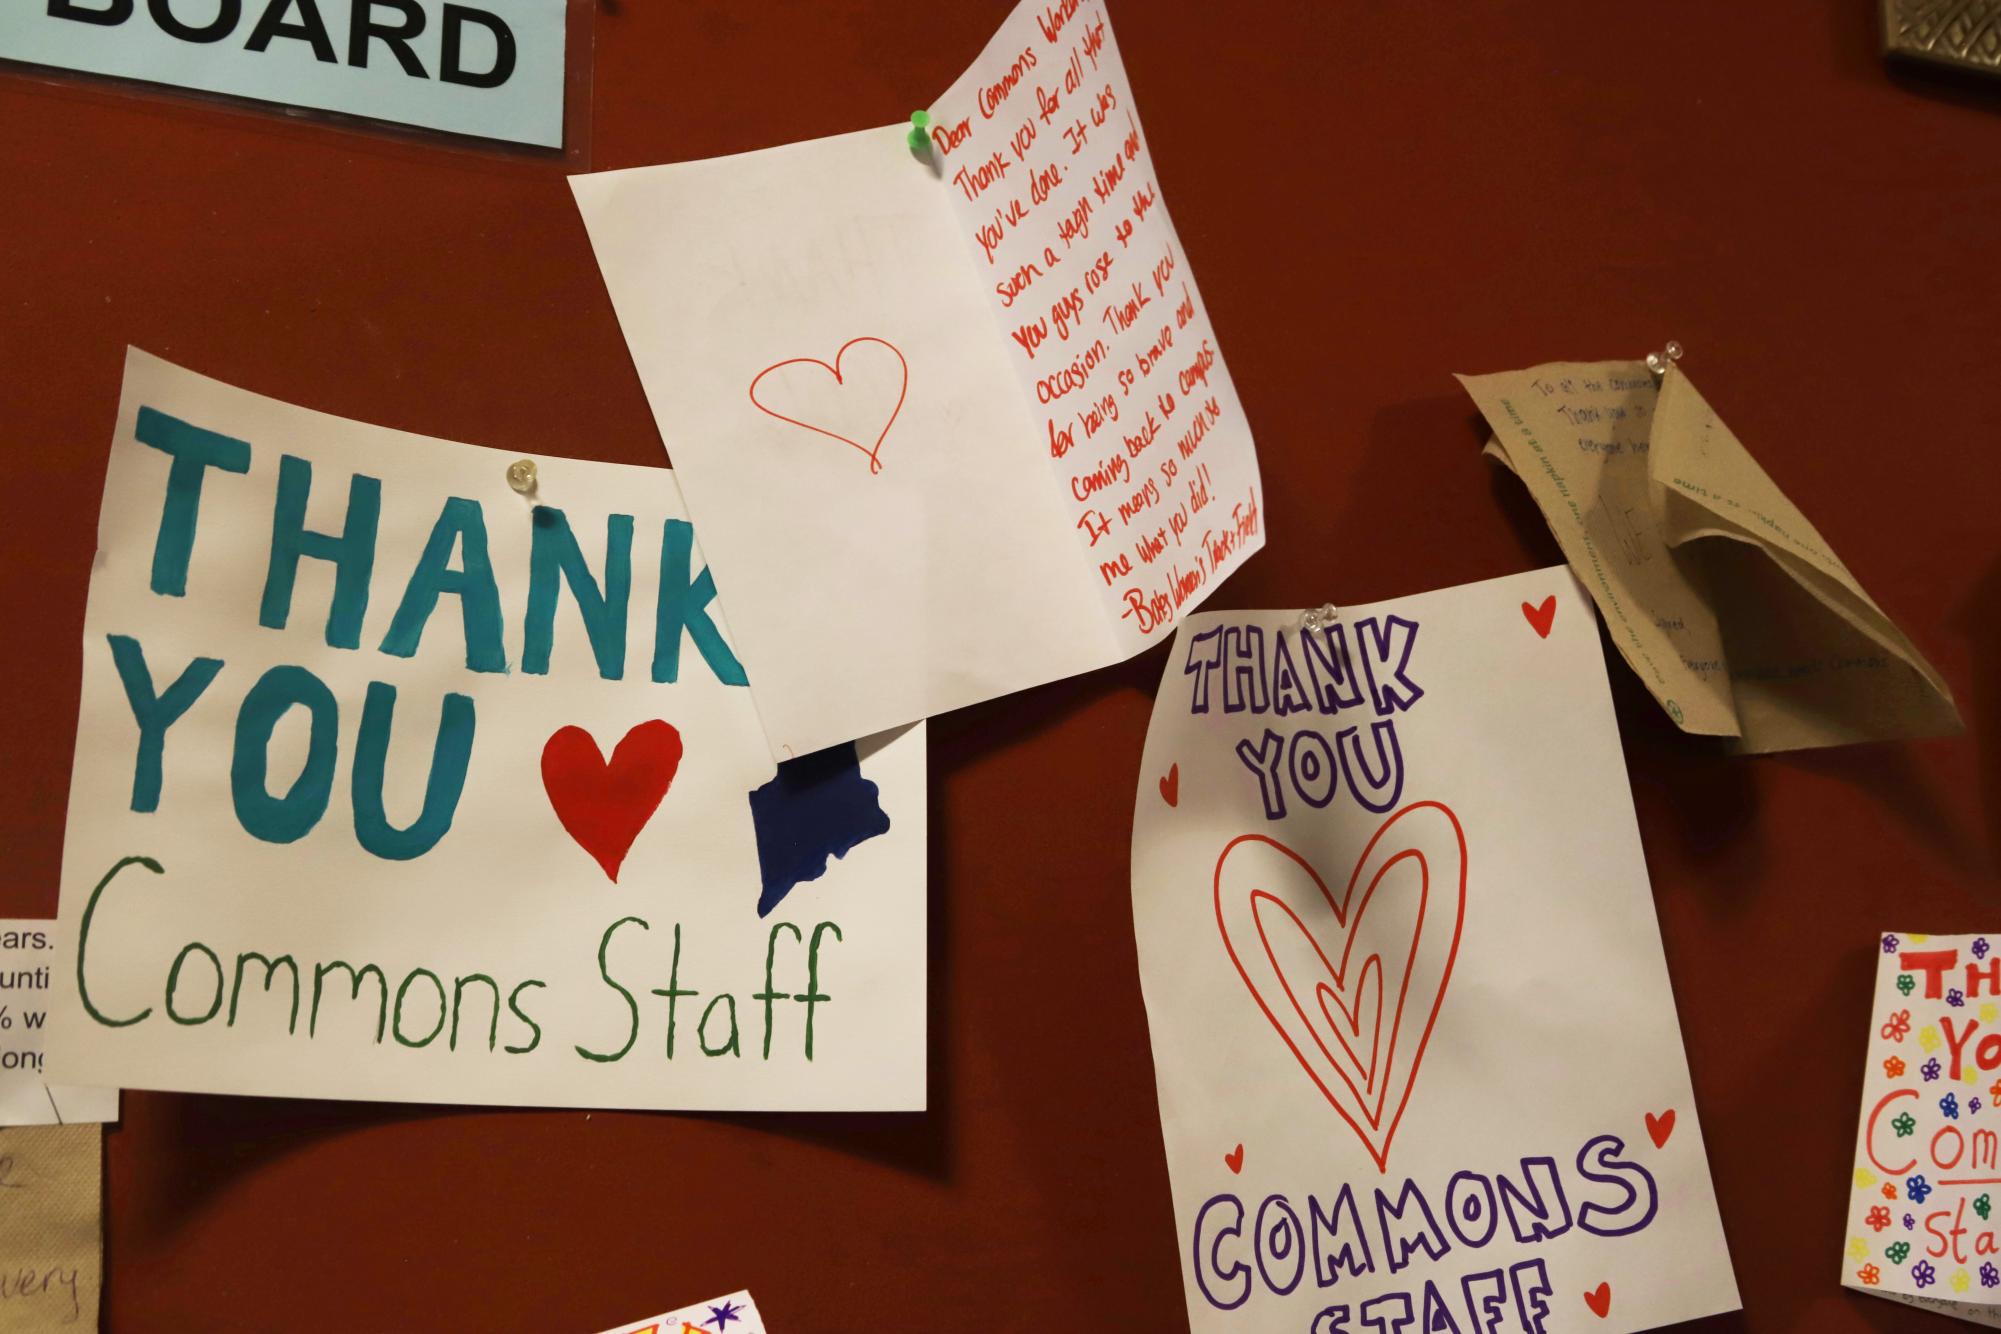 Thank-you cards from students line the walls of Commons after Oct. 25. Carly Philpott/The Bates Student.